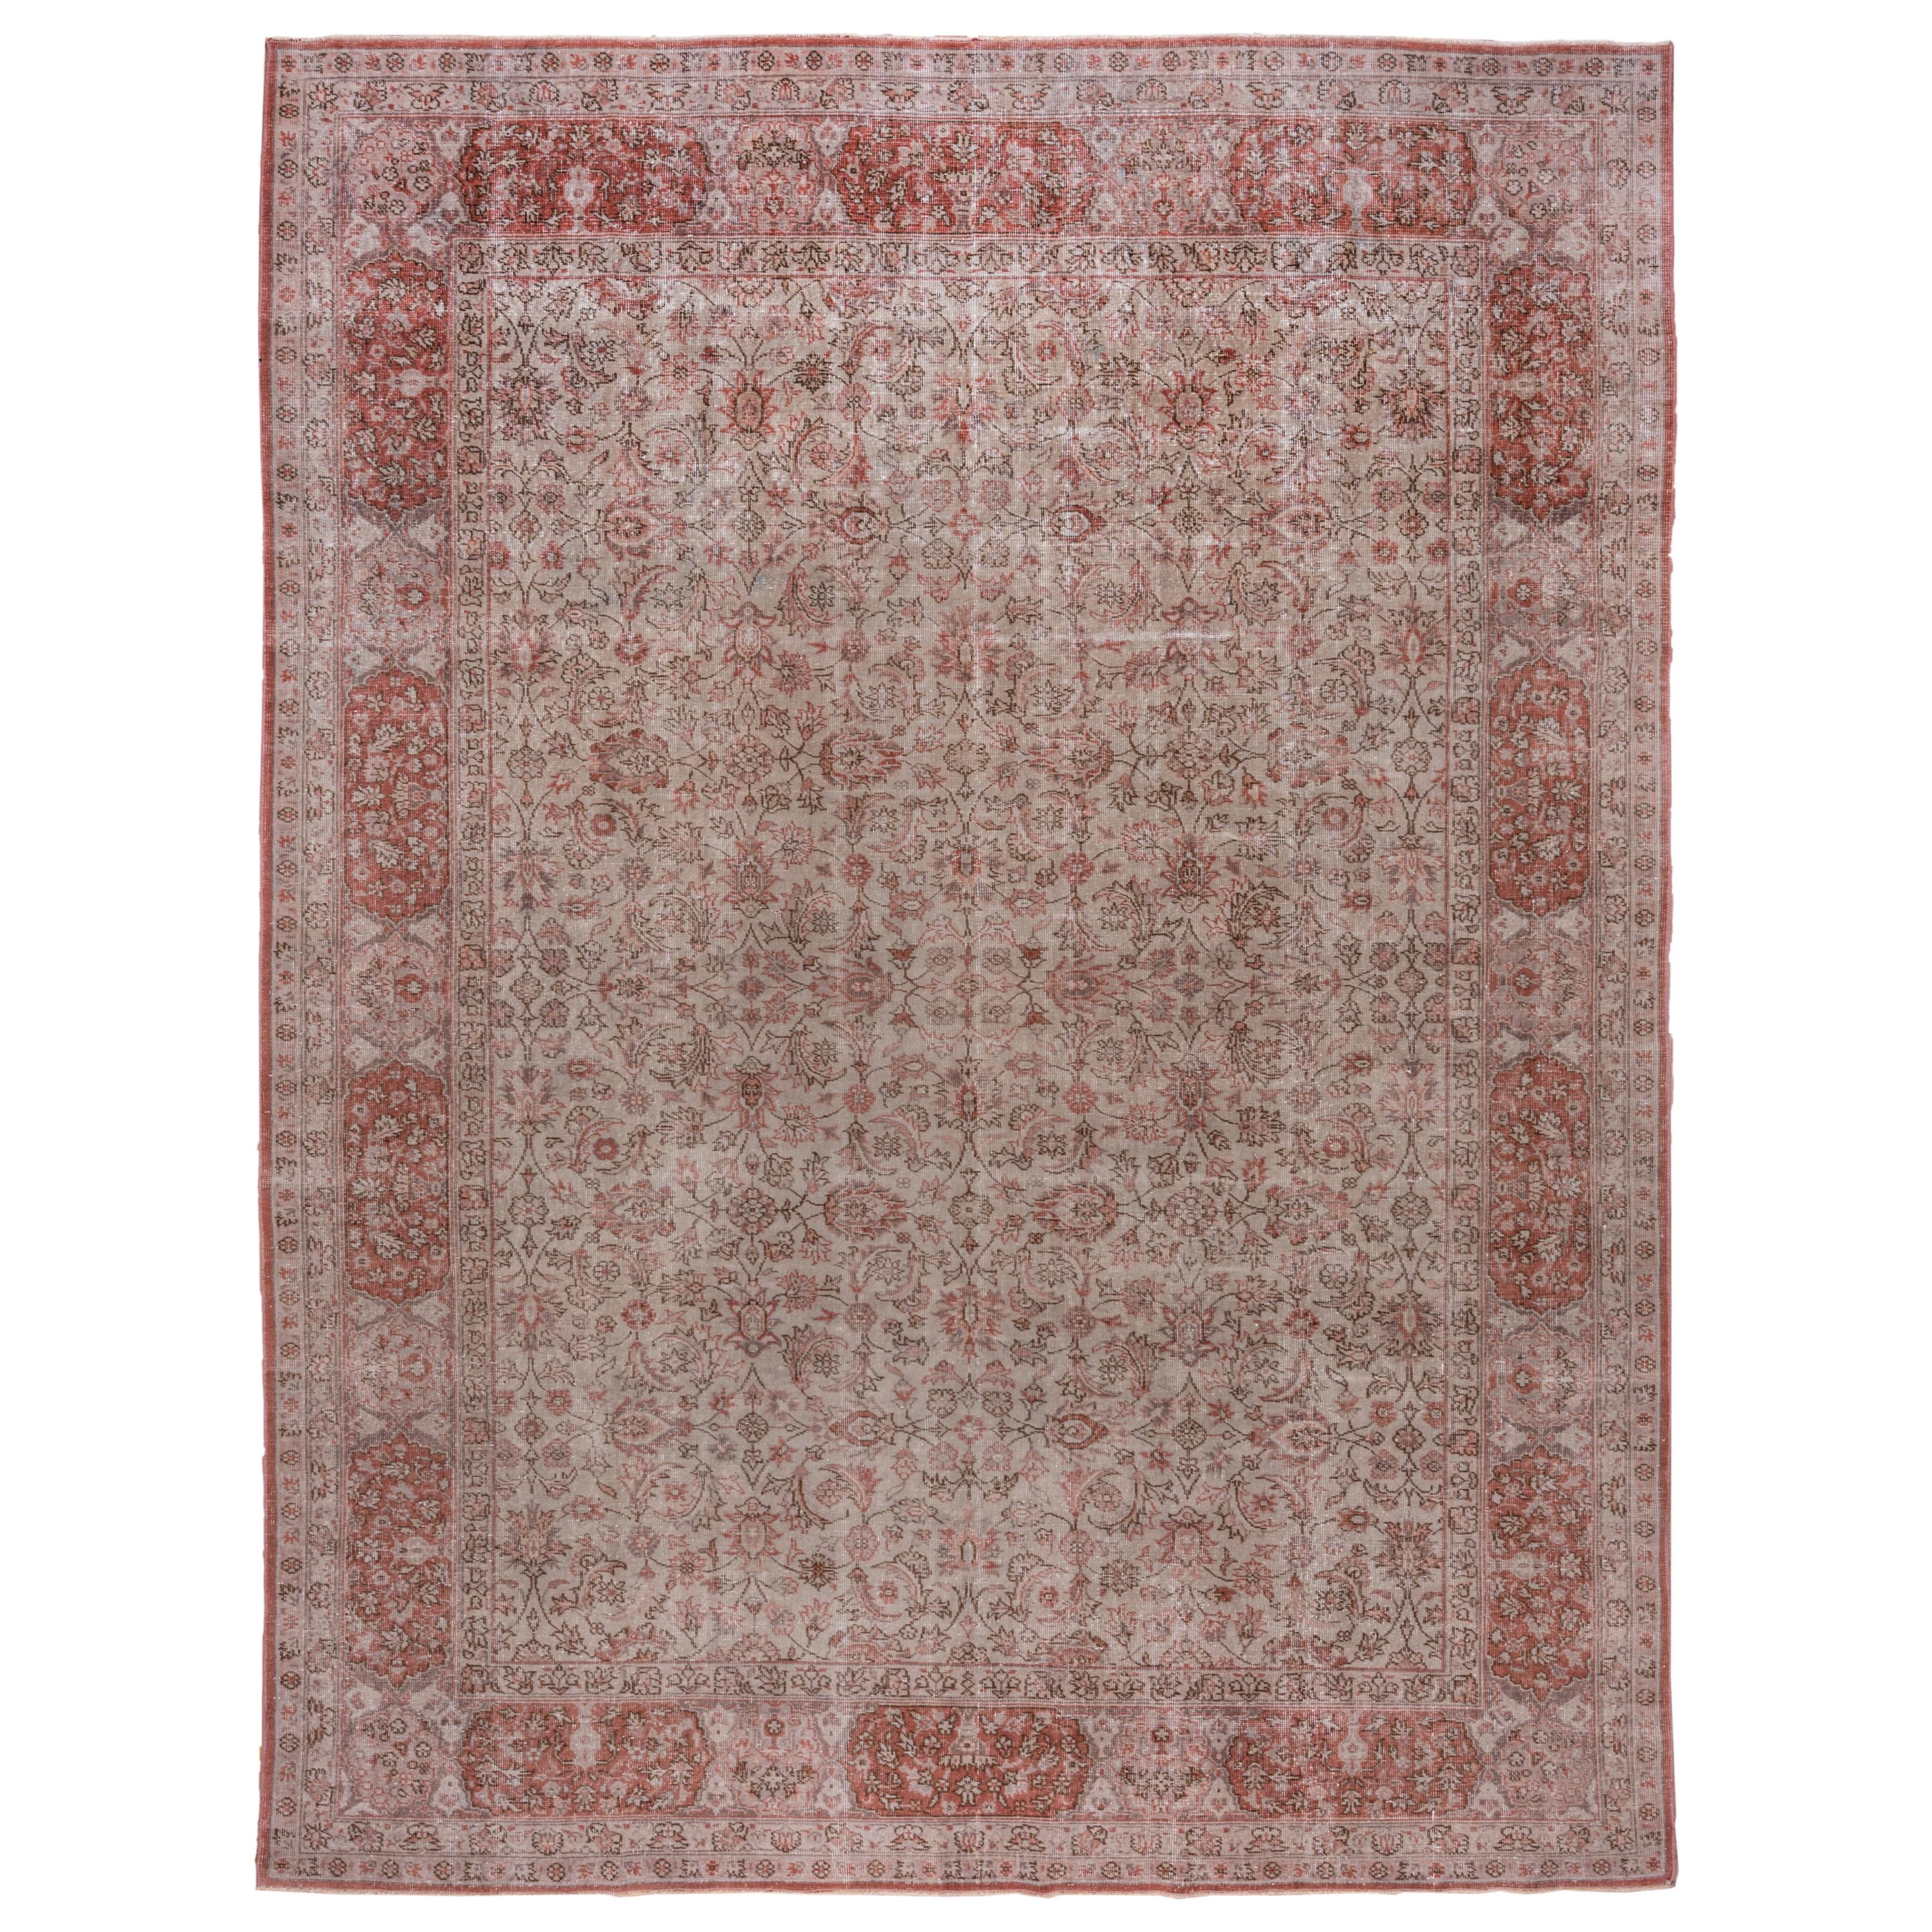 Antique Turkish Oushak Rug, Red Borders, Taupe Allover Field, circa 1940s